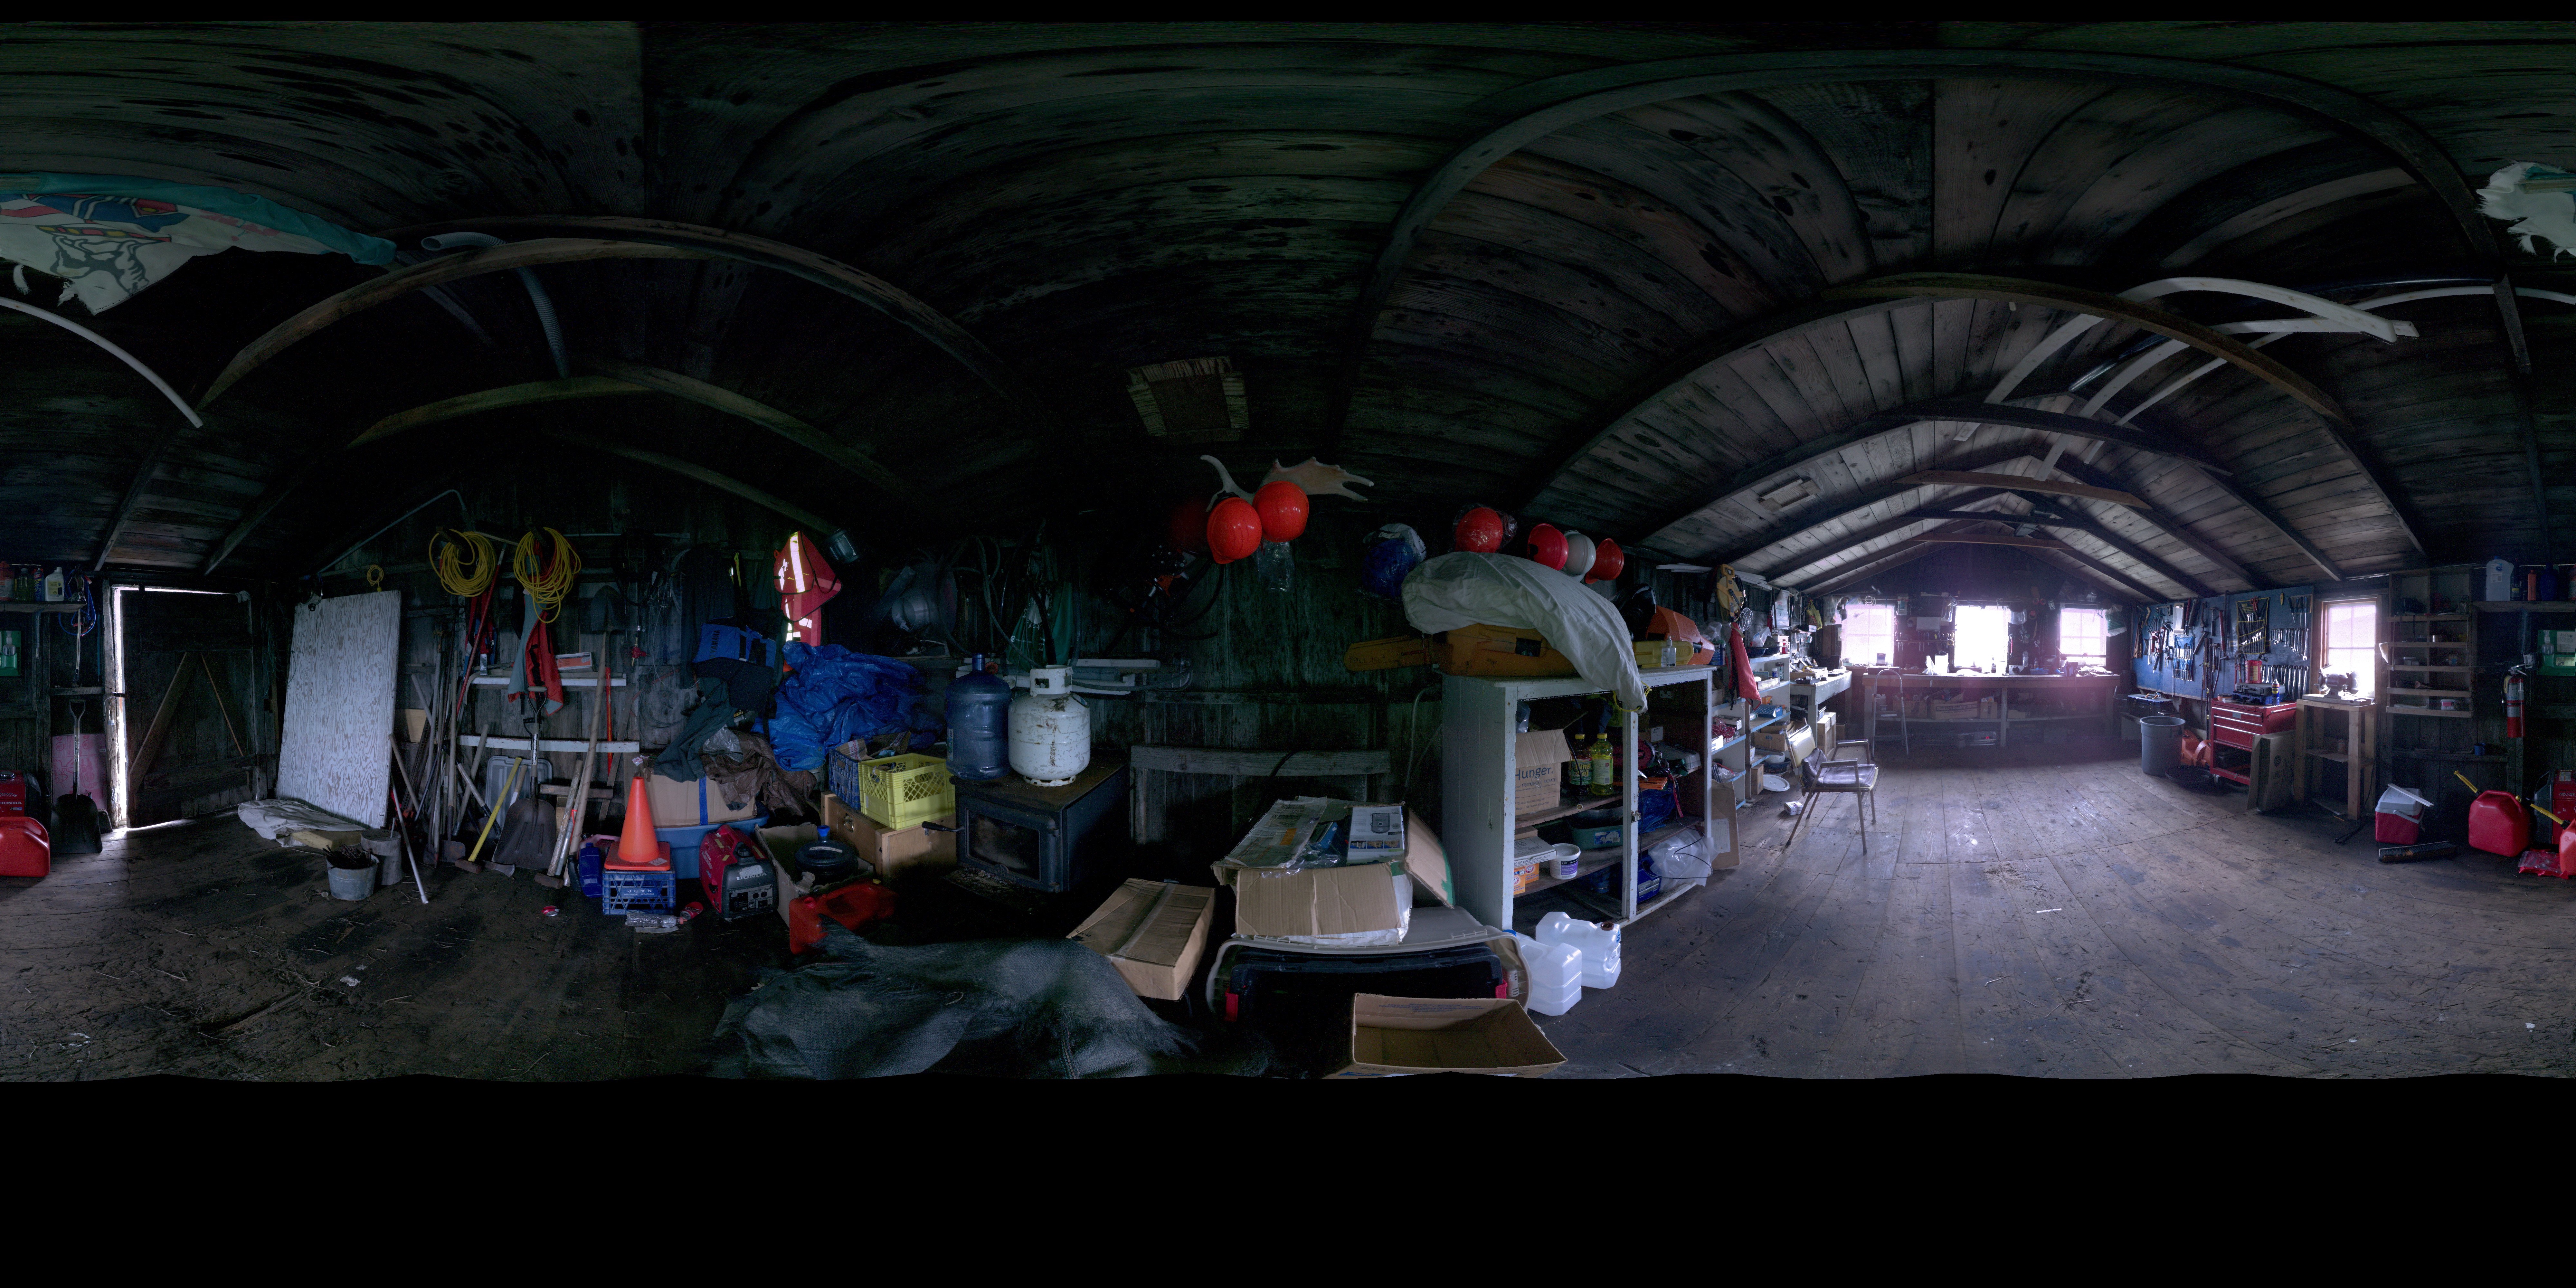 Panoramic view of the interior of the Blubber House from scanning location 4